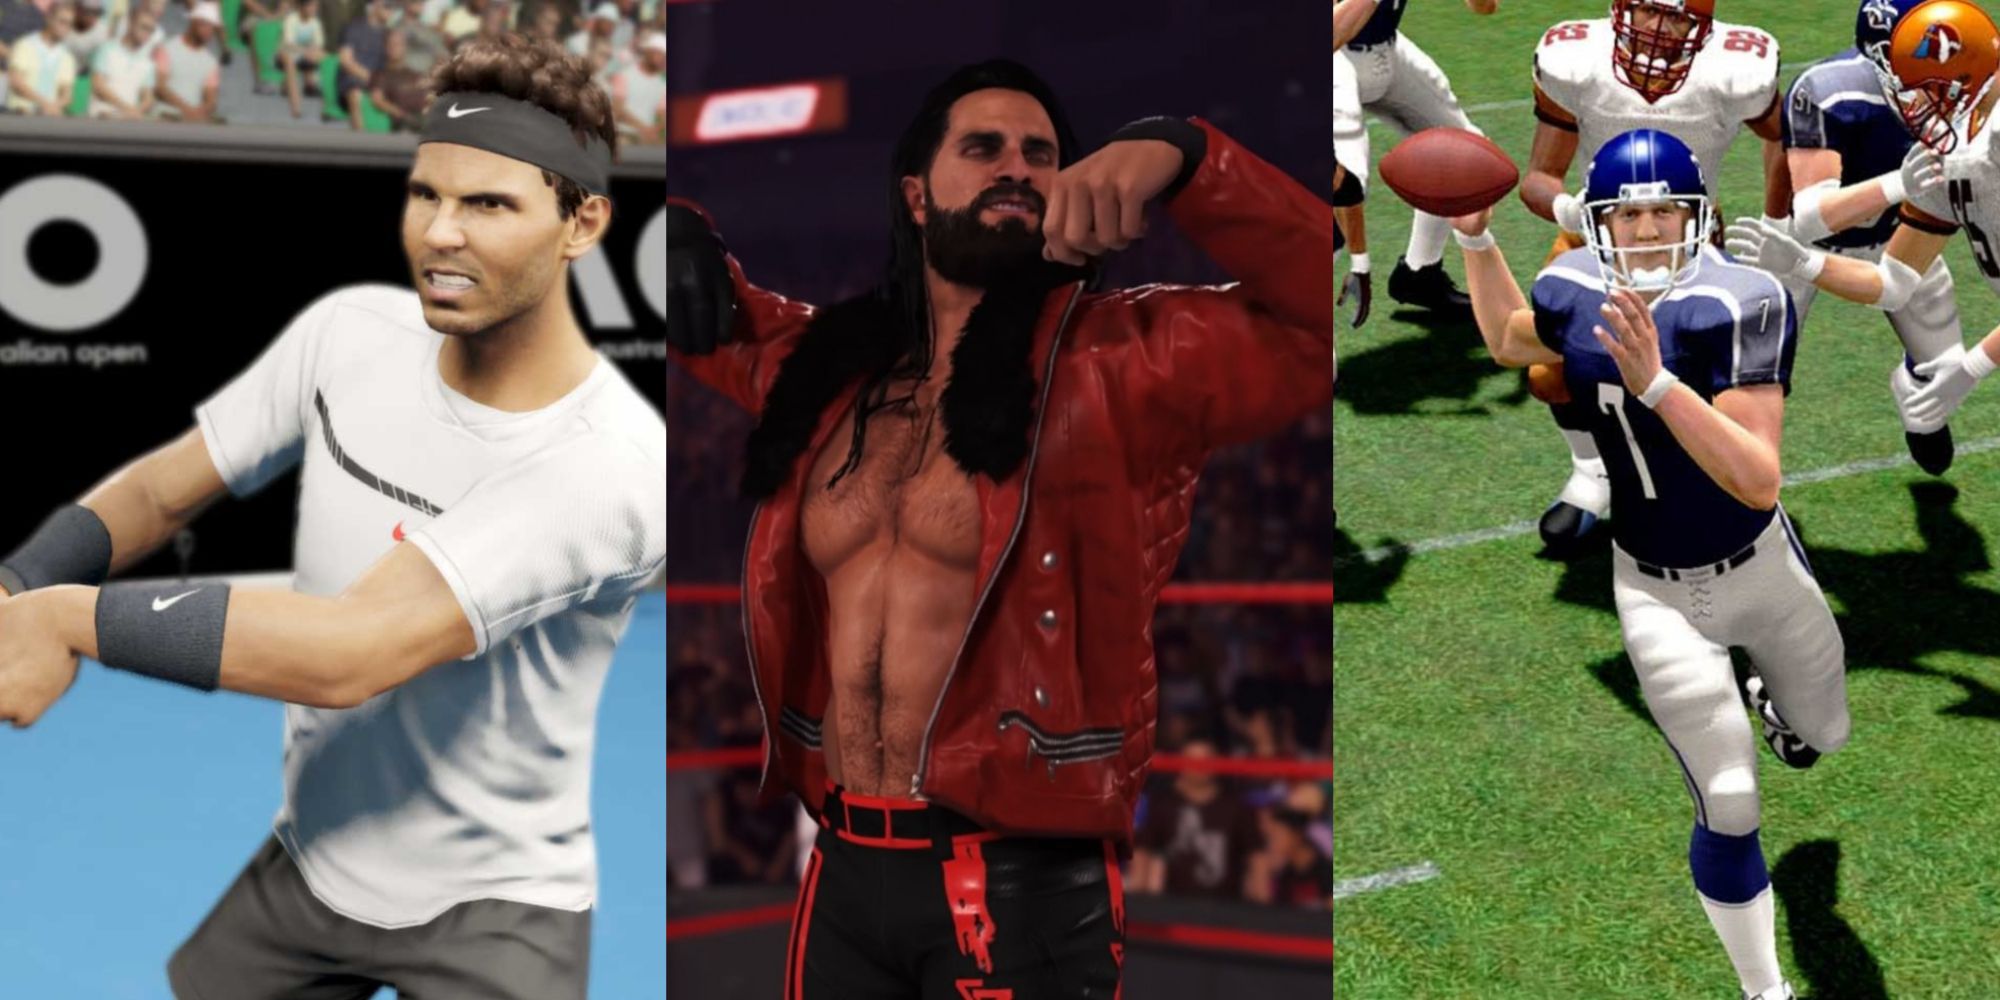 The 10 Best 2K Sports Games (That Aren't NBA 2K), According To Metacritic